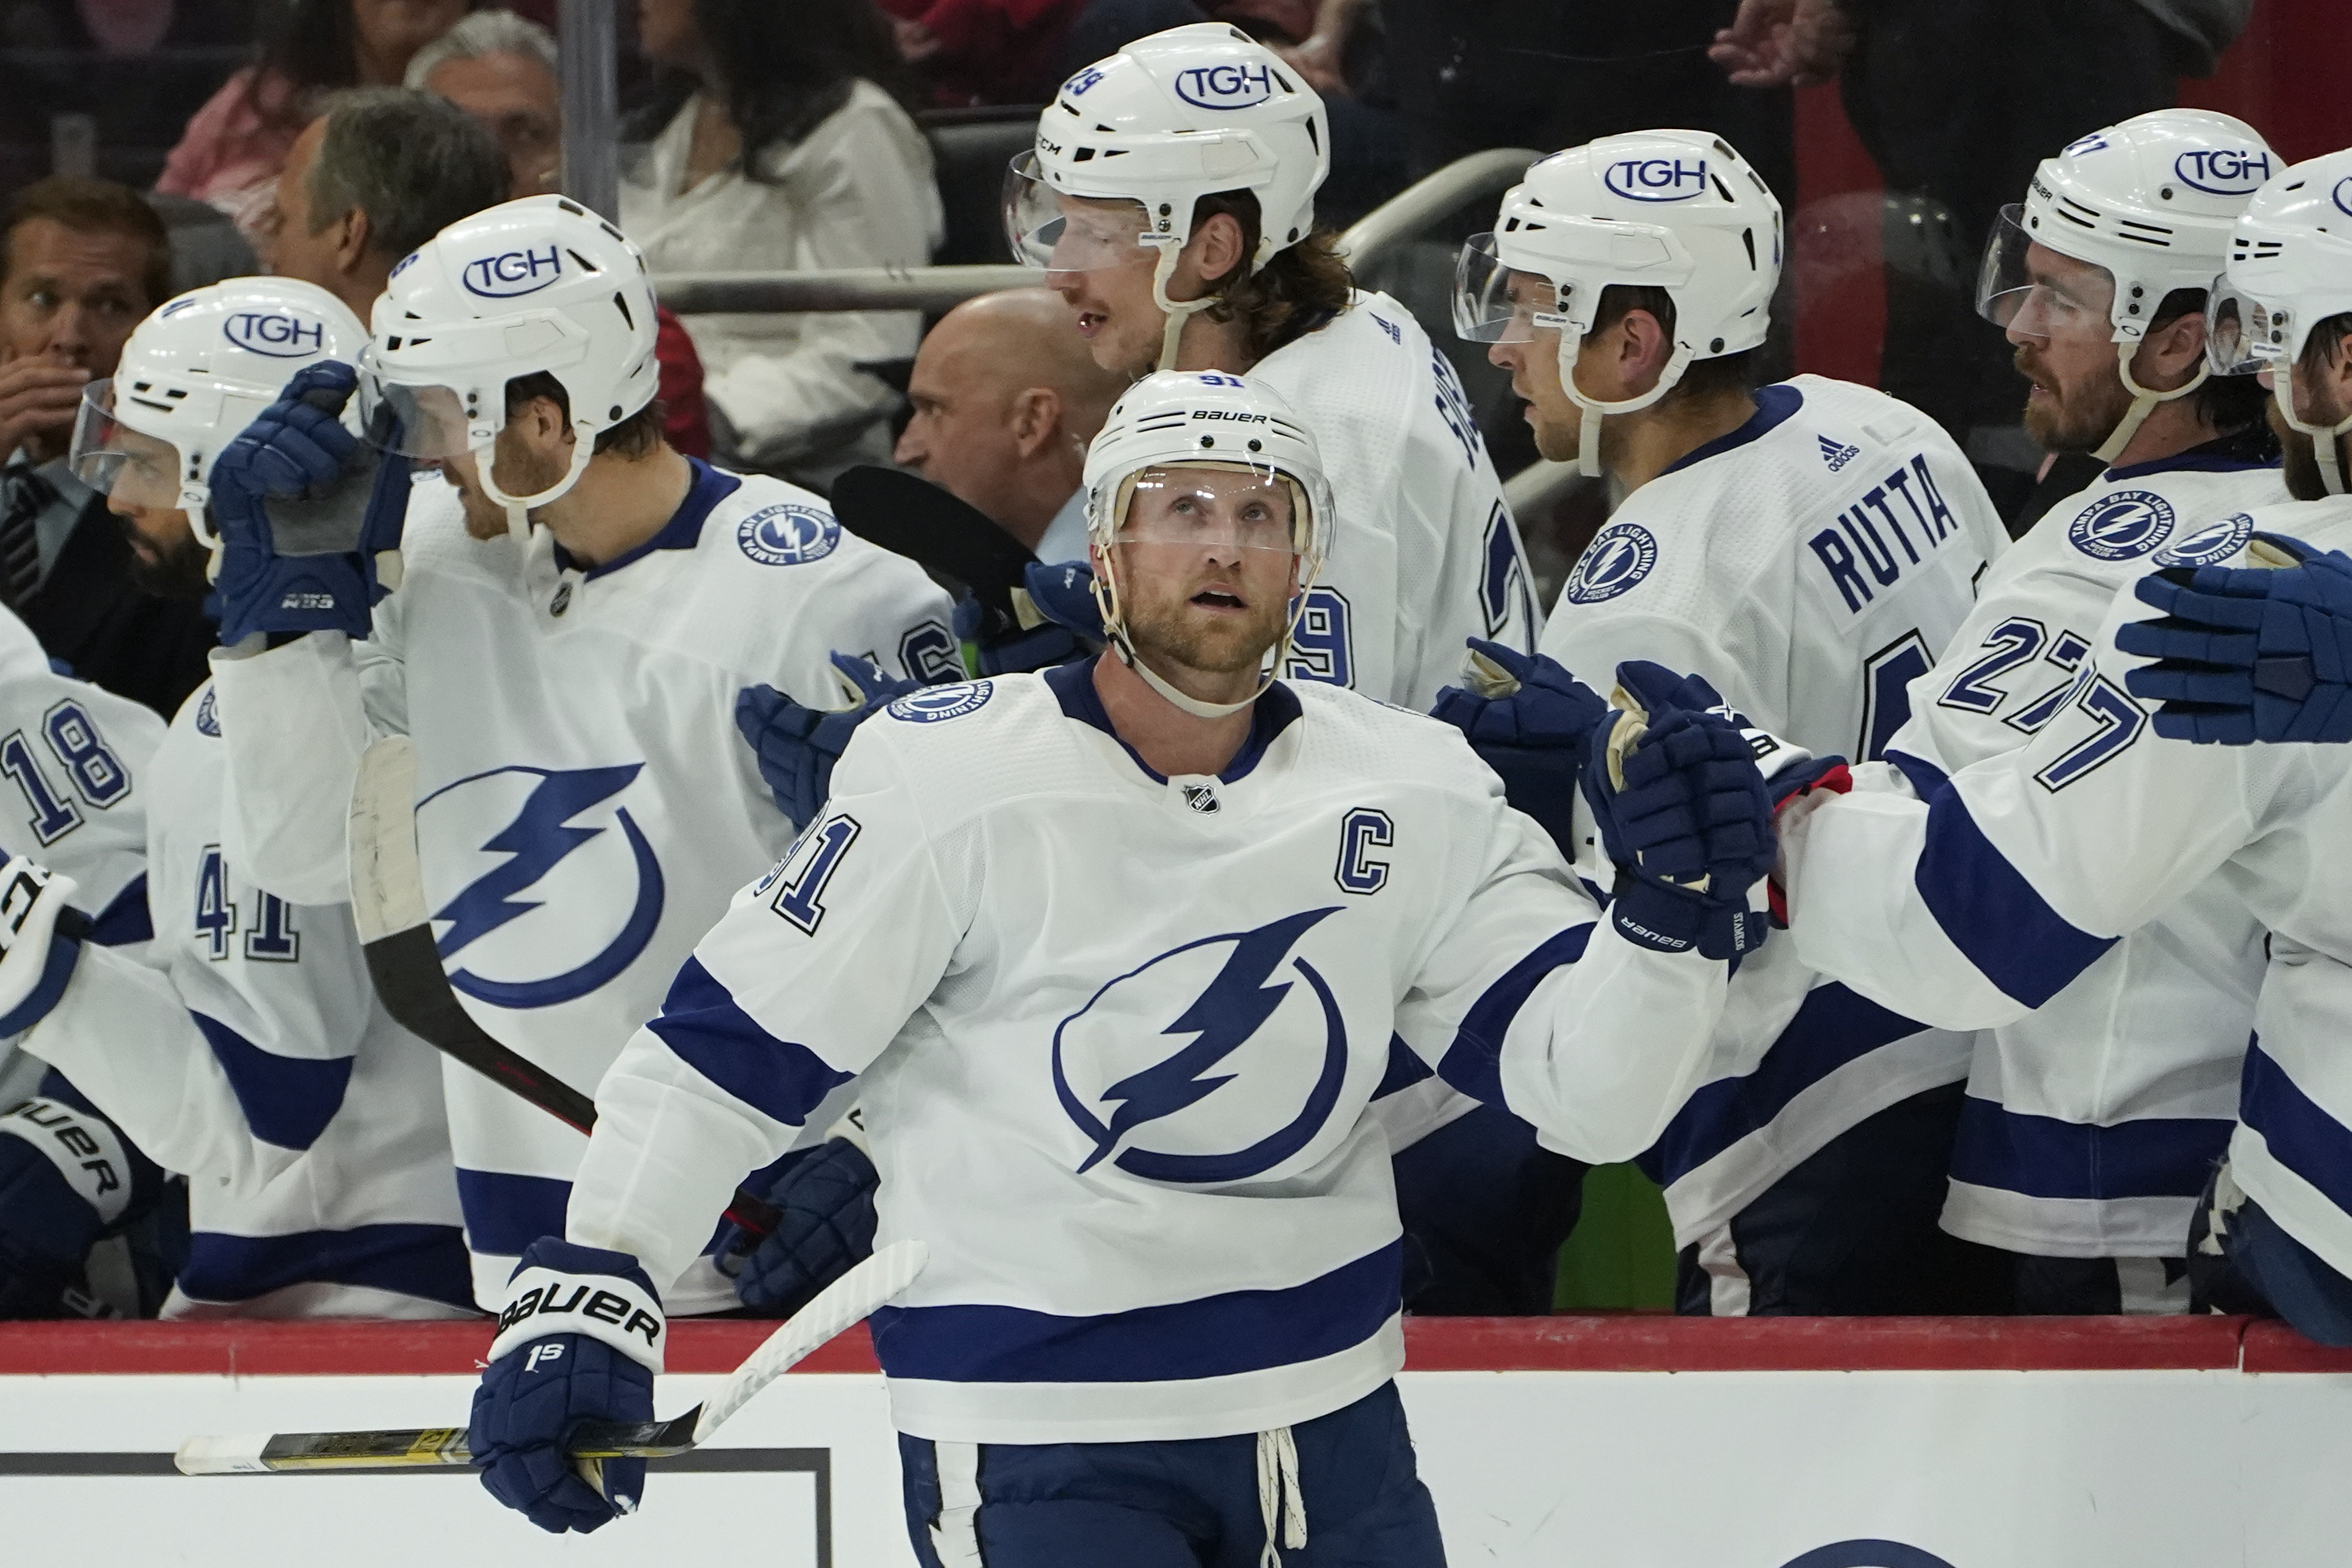 CRACKS OF DON: Cheers to Nikita Kucherov, not just for his great